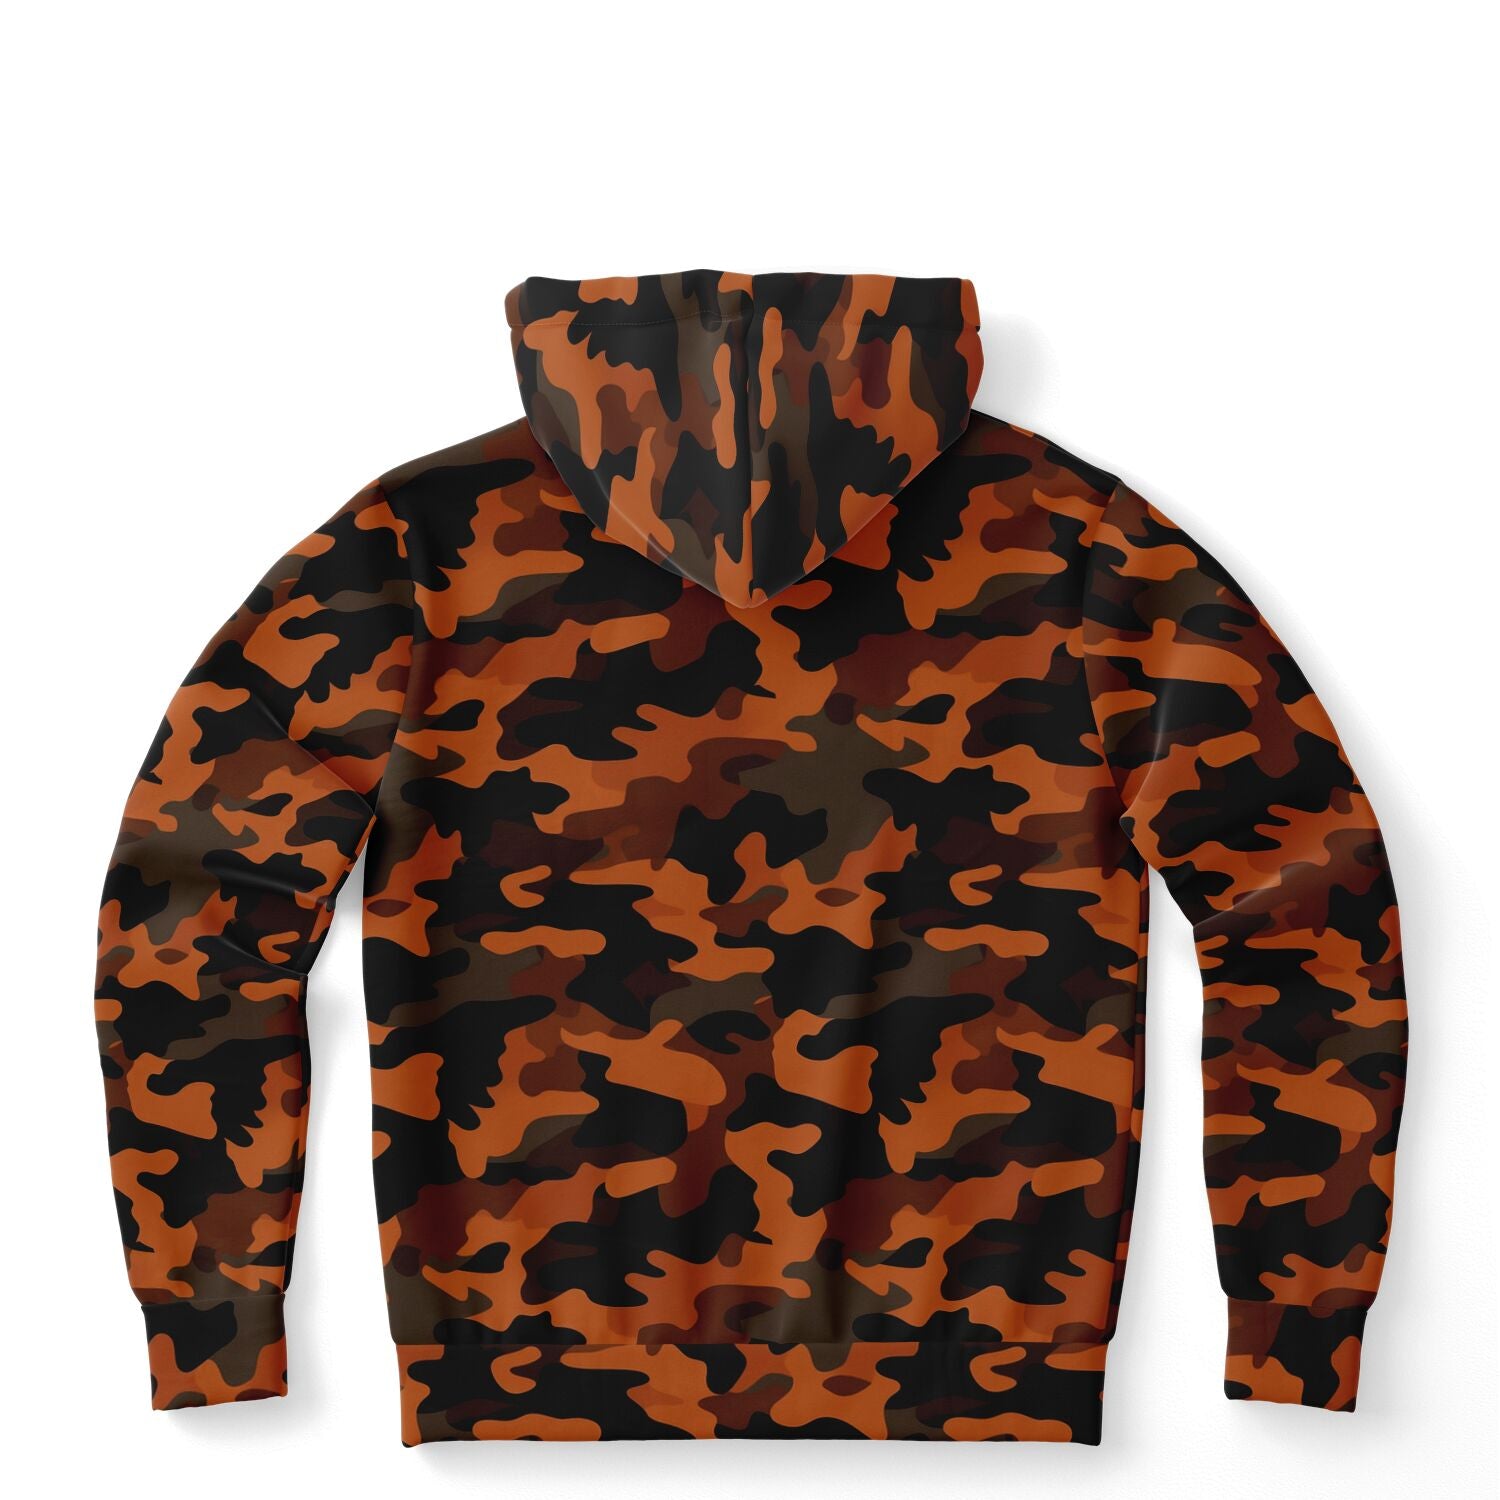 Black and Orange Camo Hoodie, Camouflage Pullover Men Women Adult Aesthetic Graphic Cotton Hooded Sweatshirt with Pockets Starcove Fashion